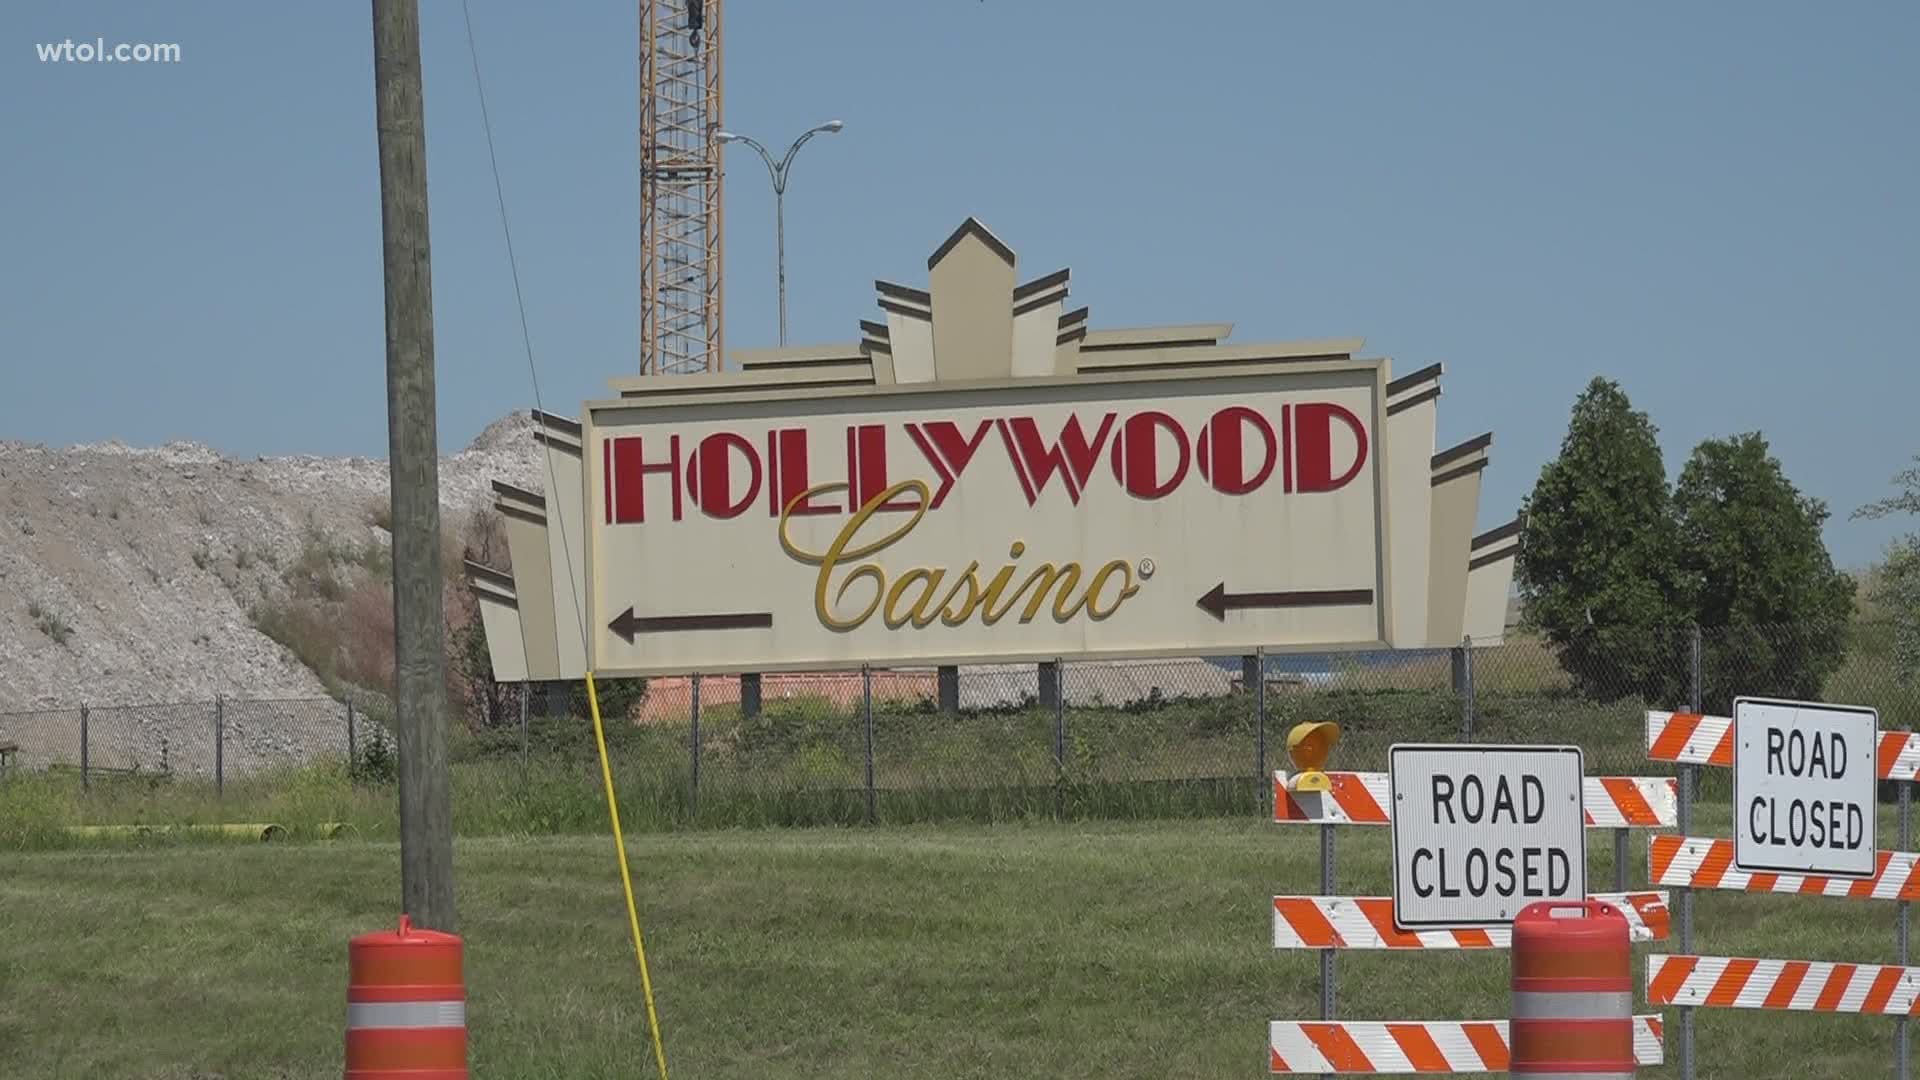 The casino will permit no more than 50% of its maximum occupancy. Health screenings will be required and wearing face coverings is encouraged.